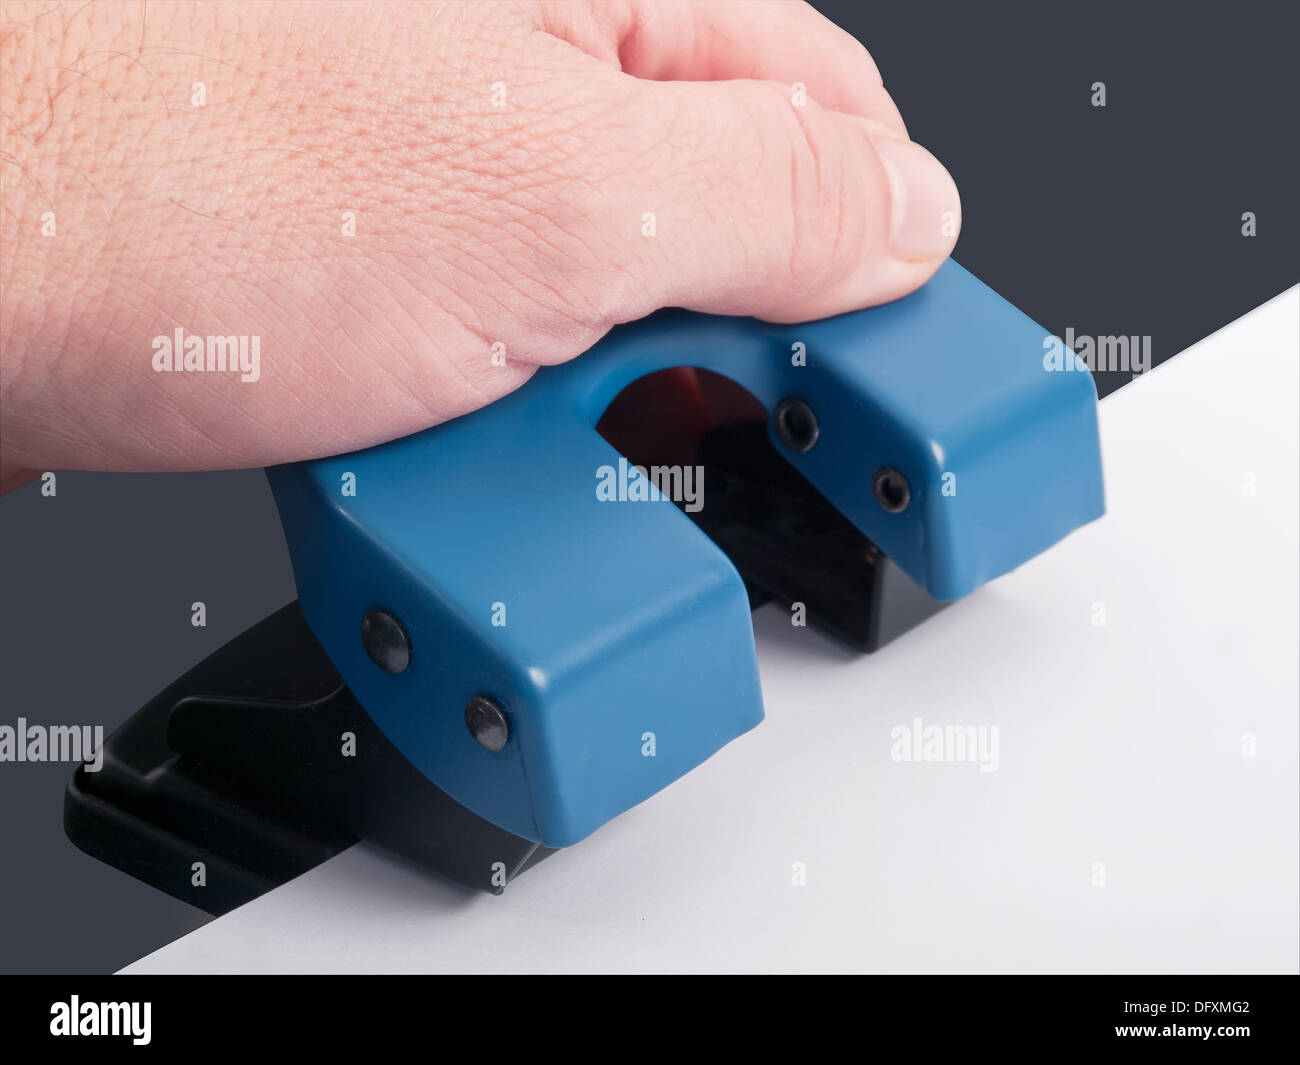 drilling hole punch with paper, studio shot Stock Photo